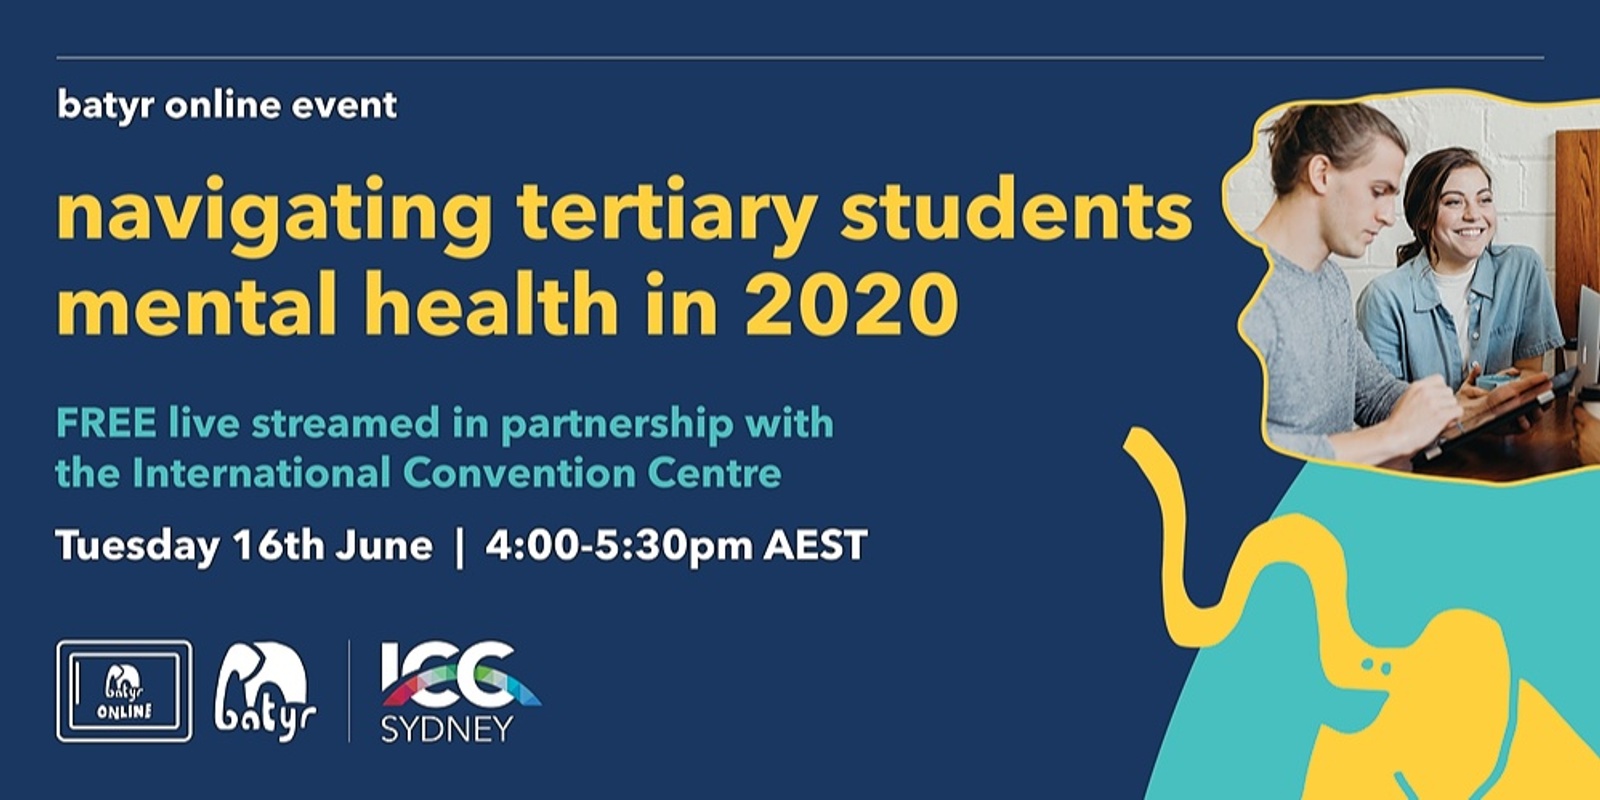 Banner image for batyr online: navigating tertiary students mental health in 2020